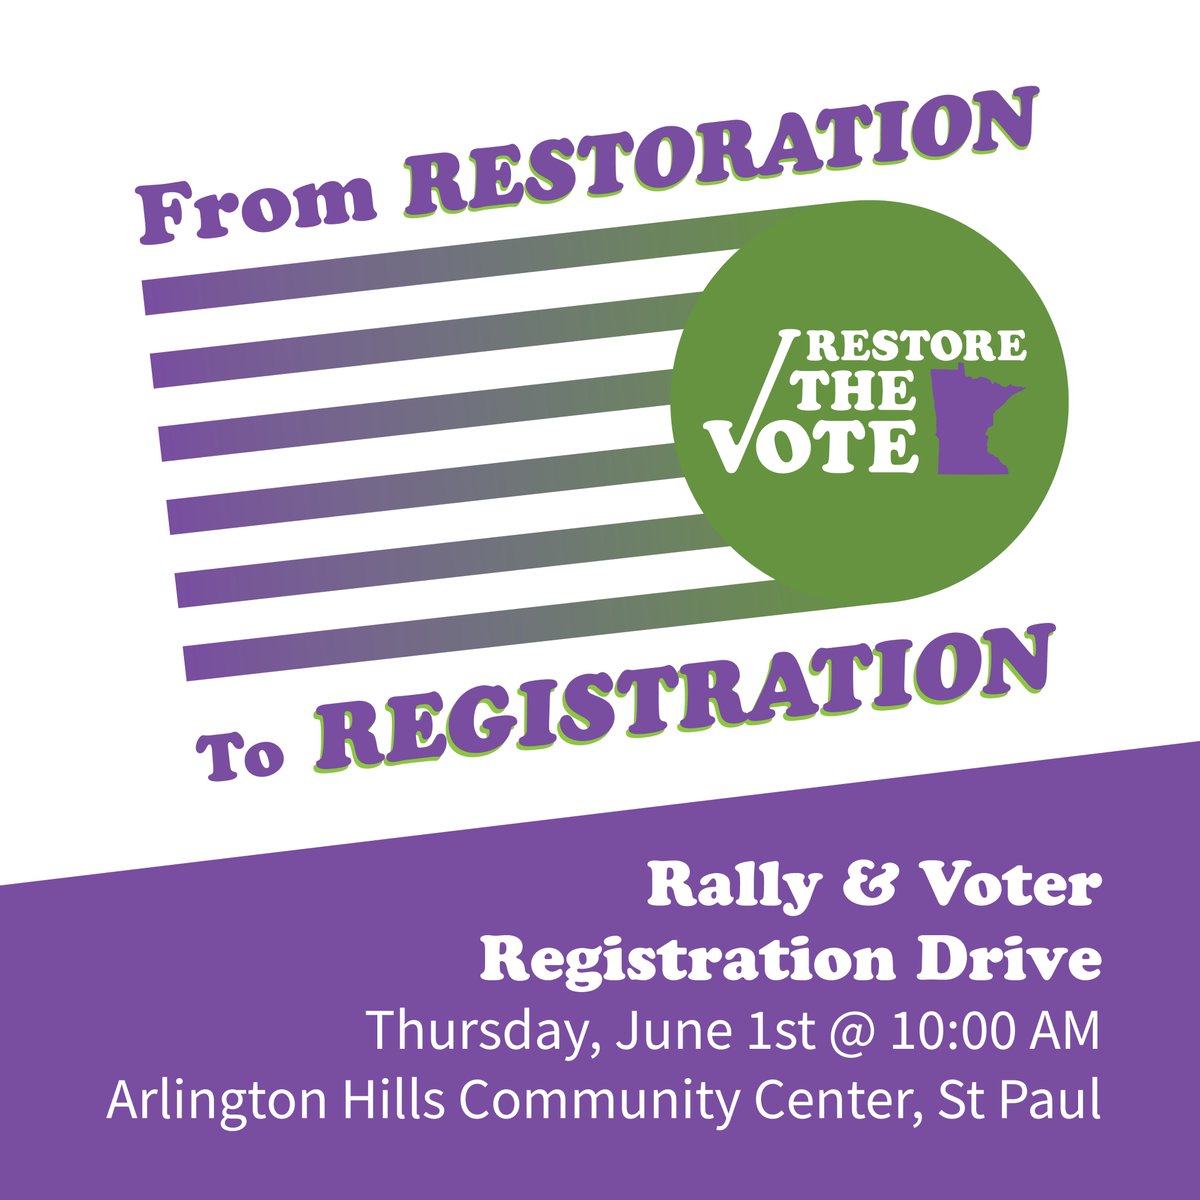 As part of the @RTVMN coalition, join us tomorrow for a rally and voter registration drive to support the 55,000 Minnesotans who’s voting rights have been officially restored. Learn more: bit.ly/45GcaEs #RestoreTheVoteMN